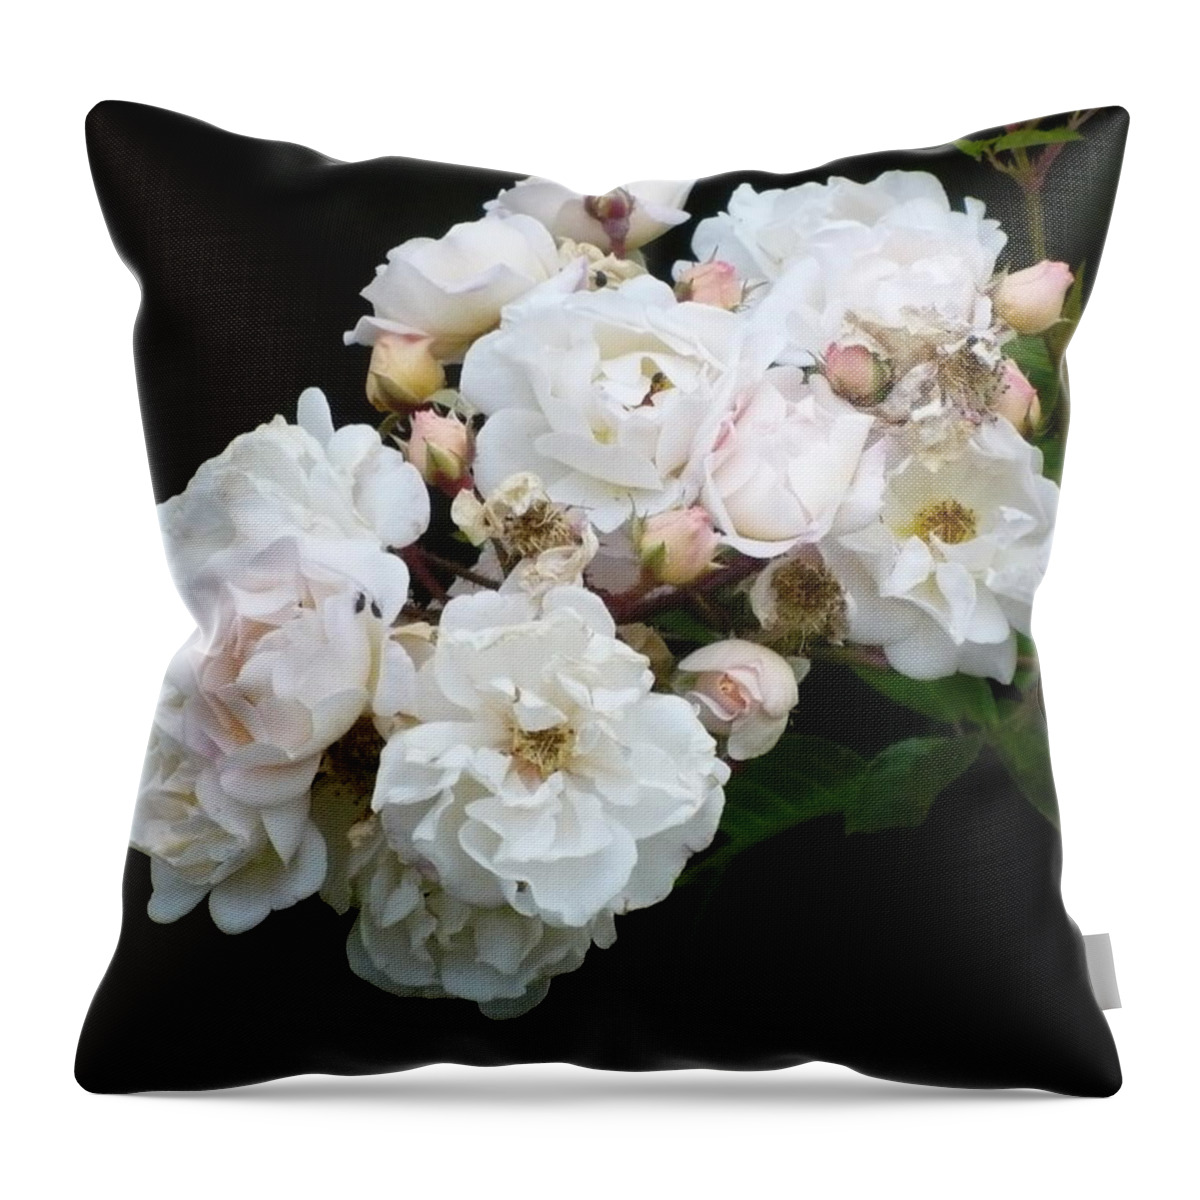 Roses Throw Pillow featuring the photograph Rose Branch by Nicki Bennett